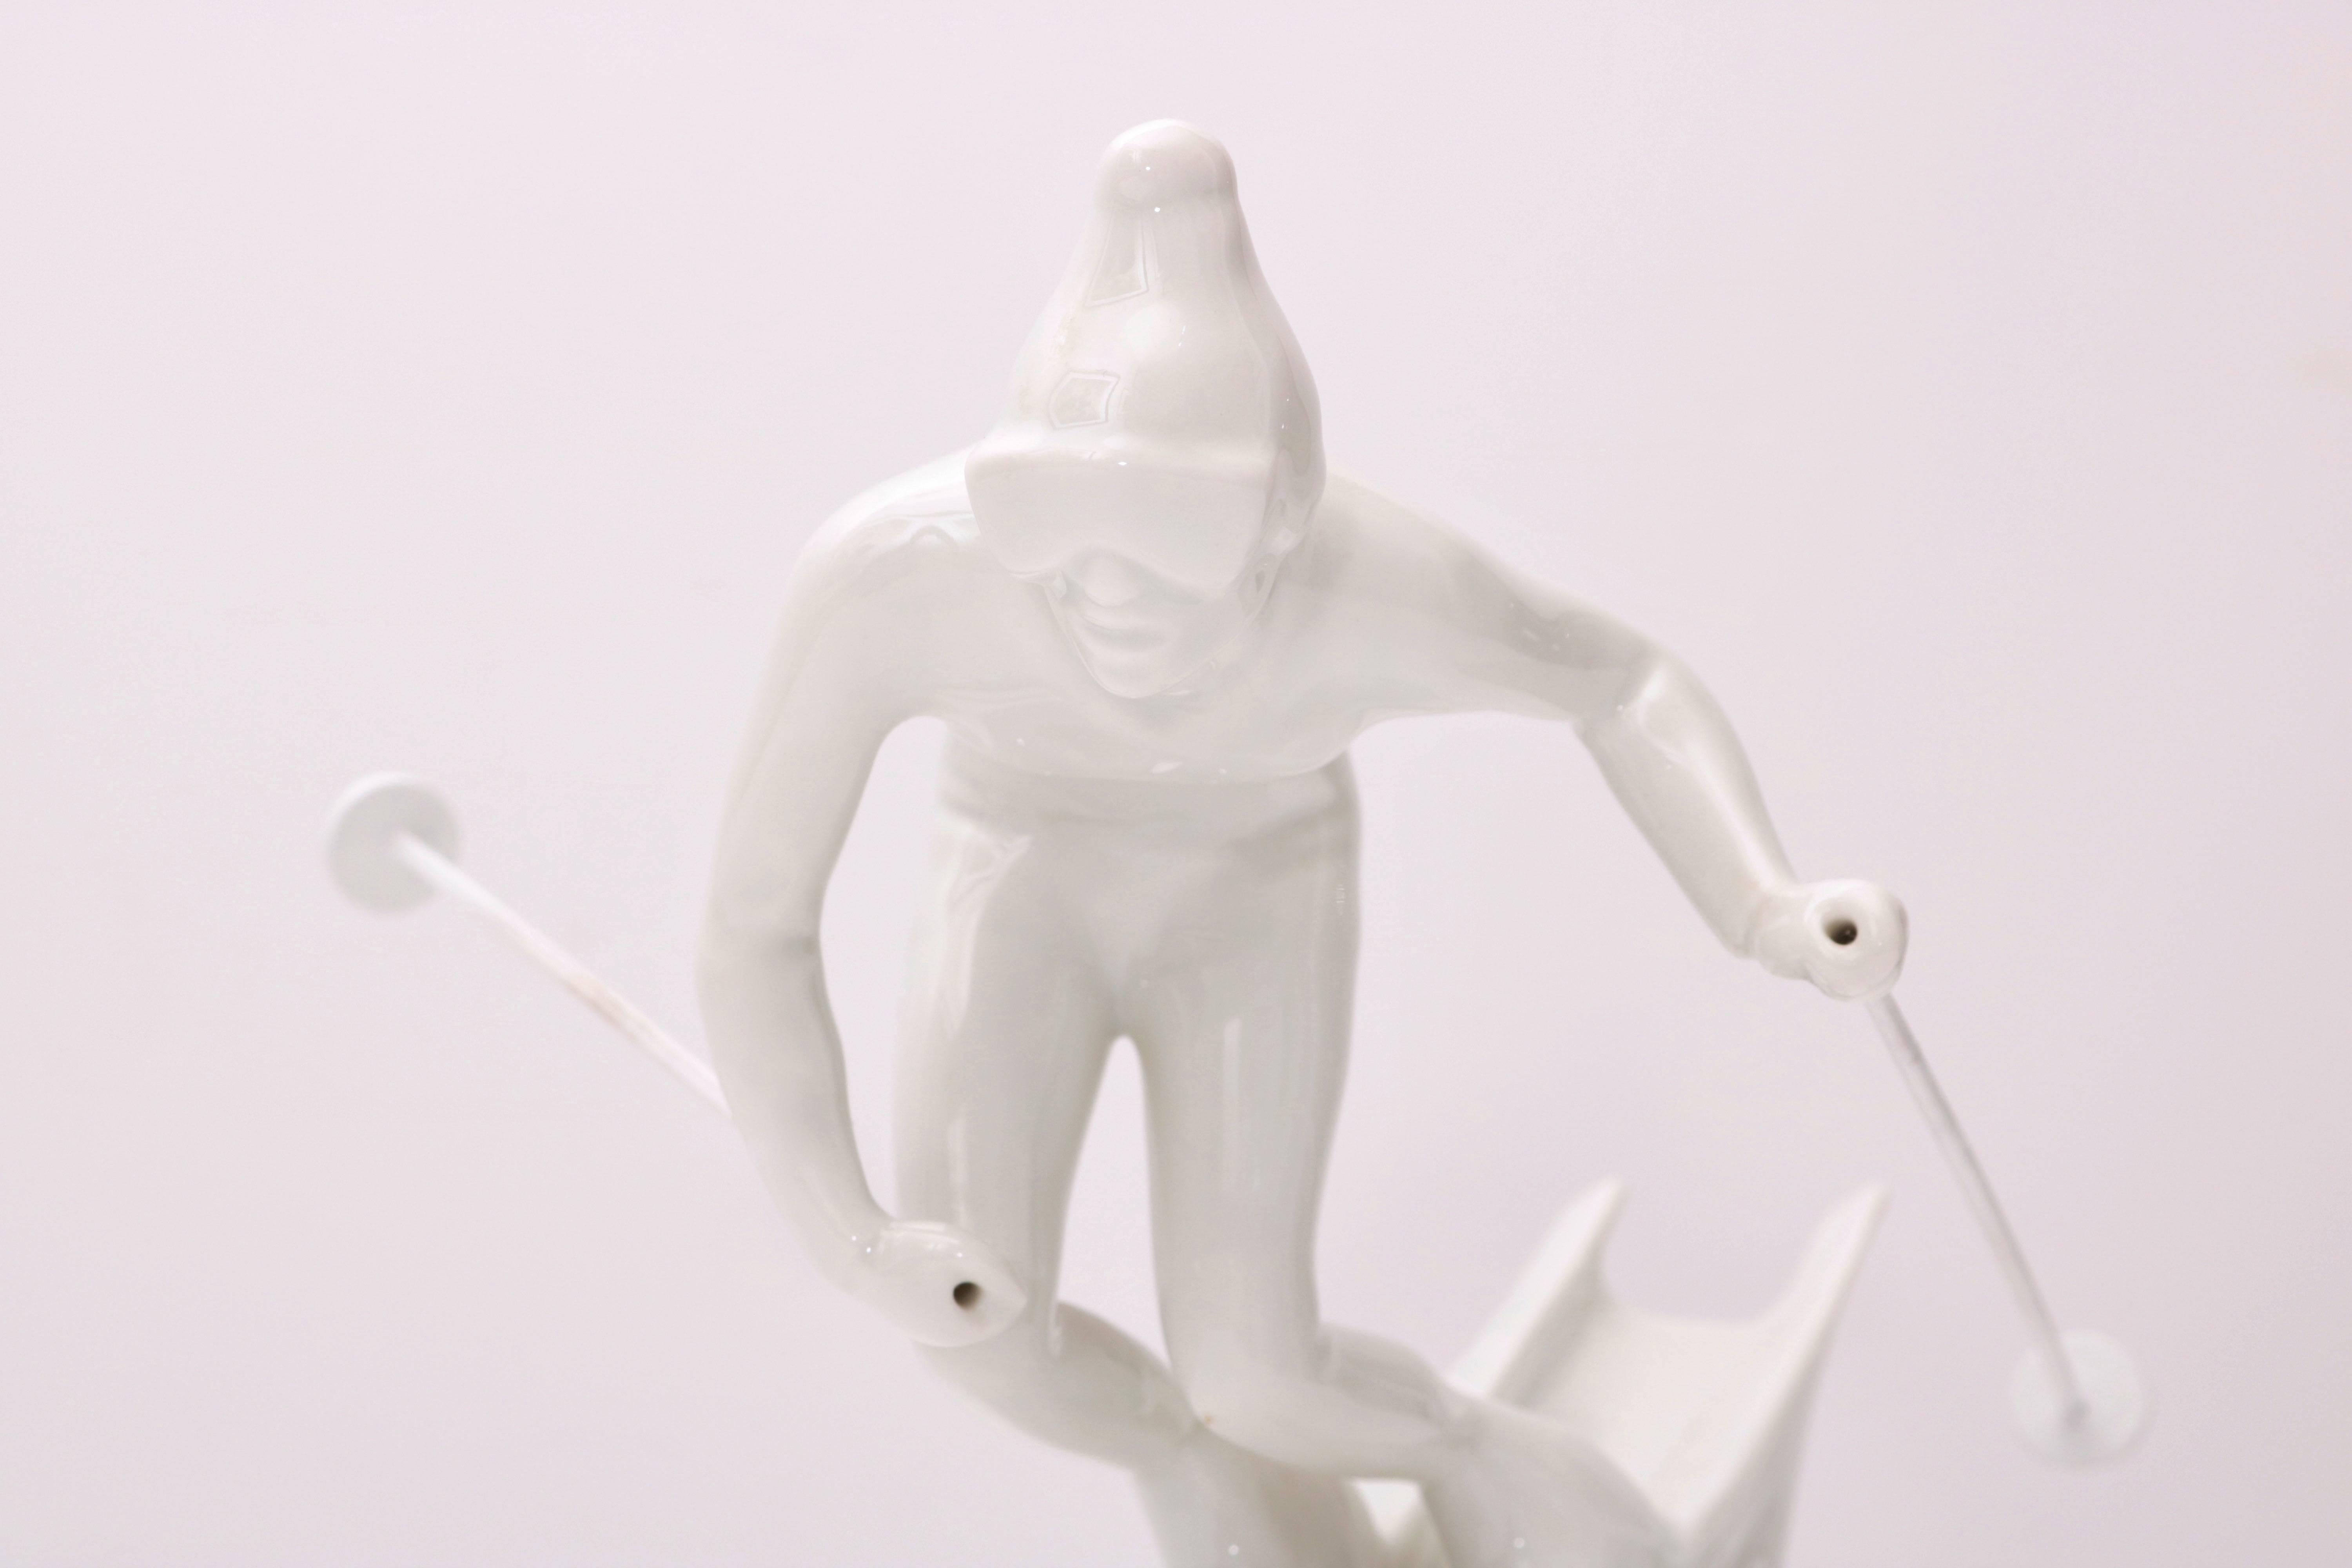 This stylish figure of a skier is by the iconic firm of Royal Dux and here they have captured the skier in pure form and movement in white porcelain.

Note: The poles are removable and made of wood and paper.

For best net trade price or